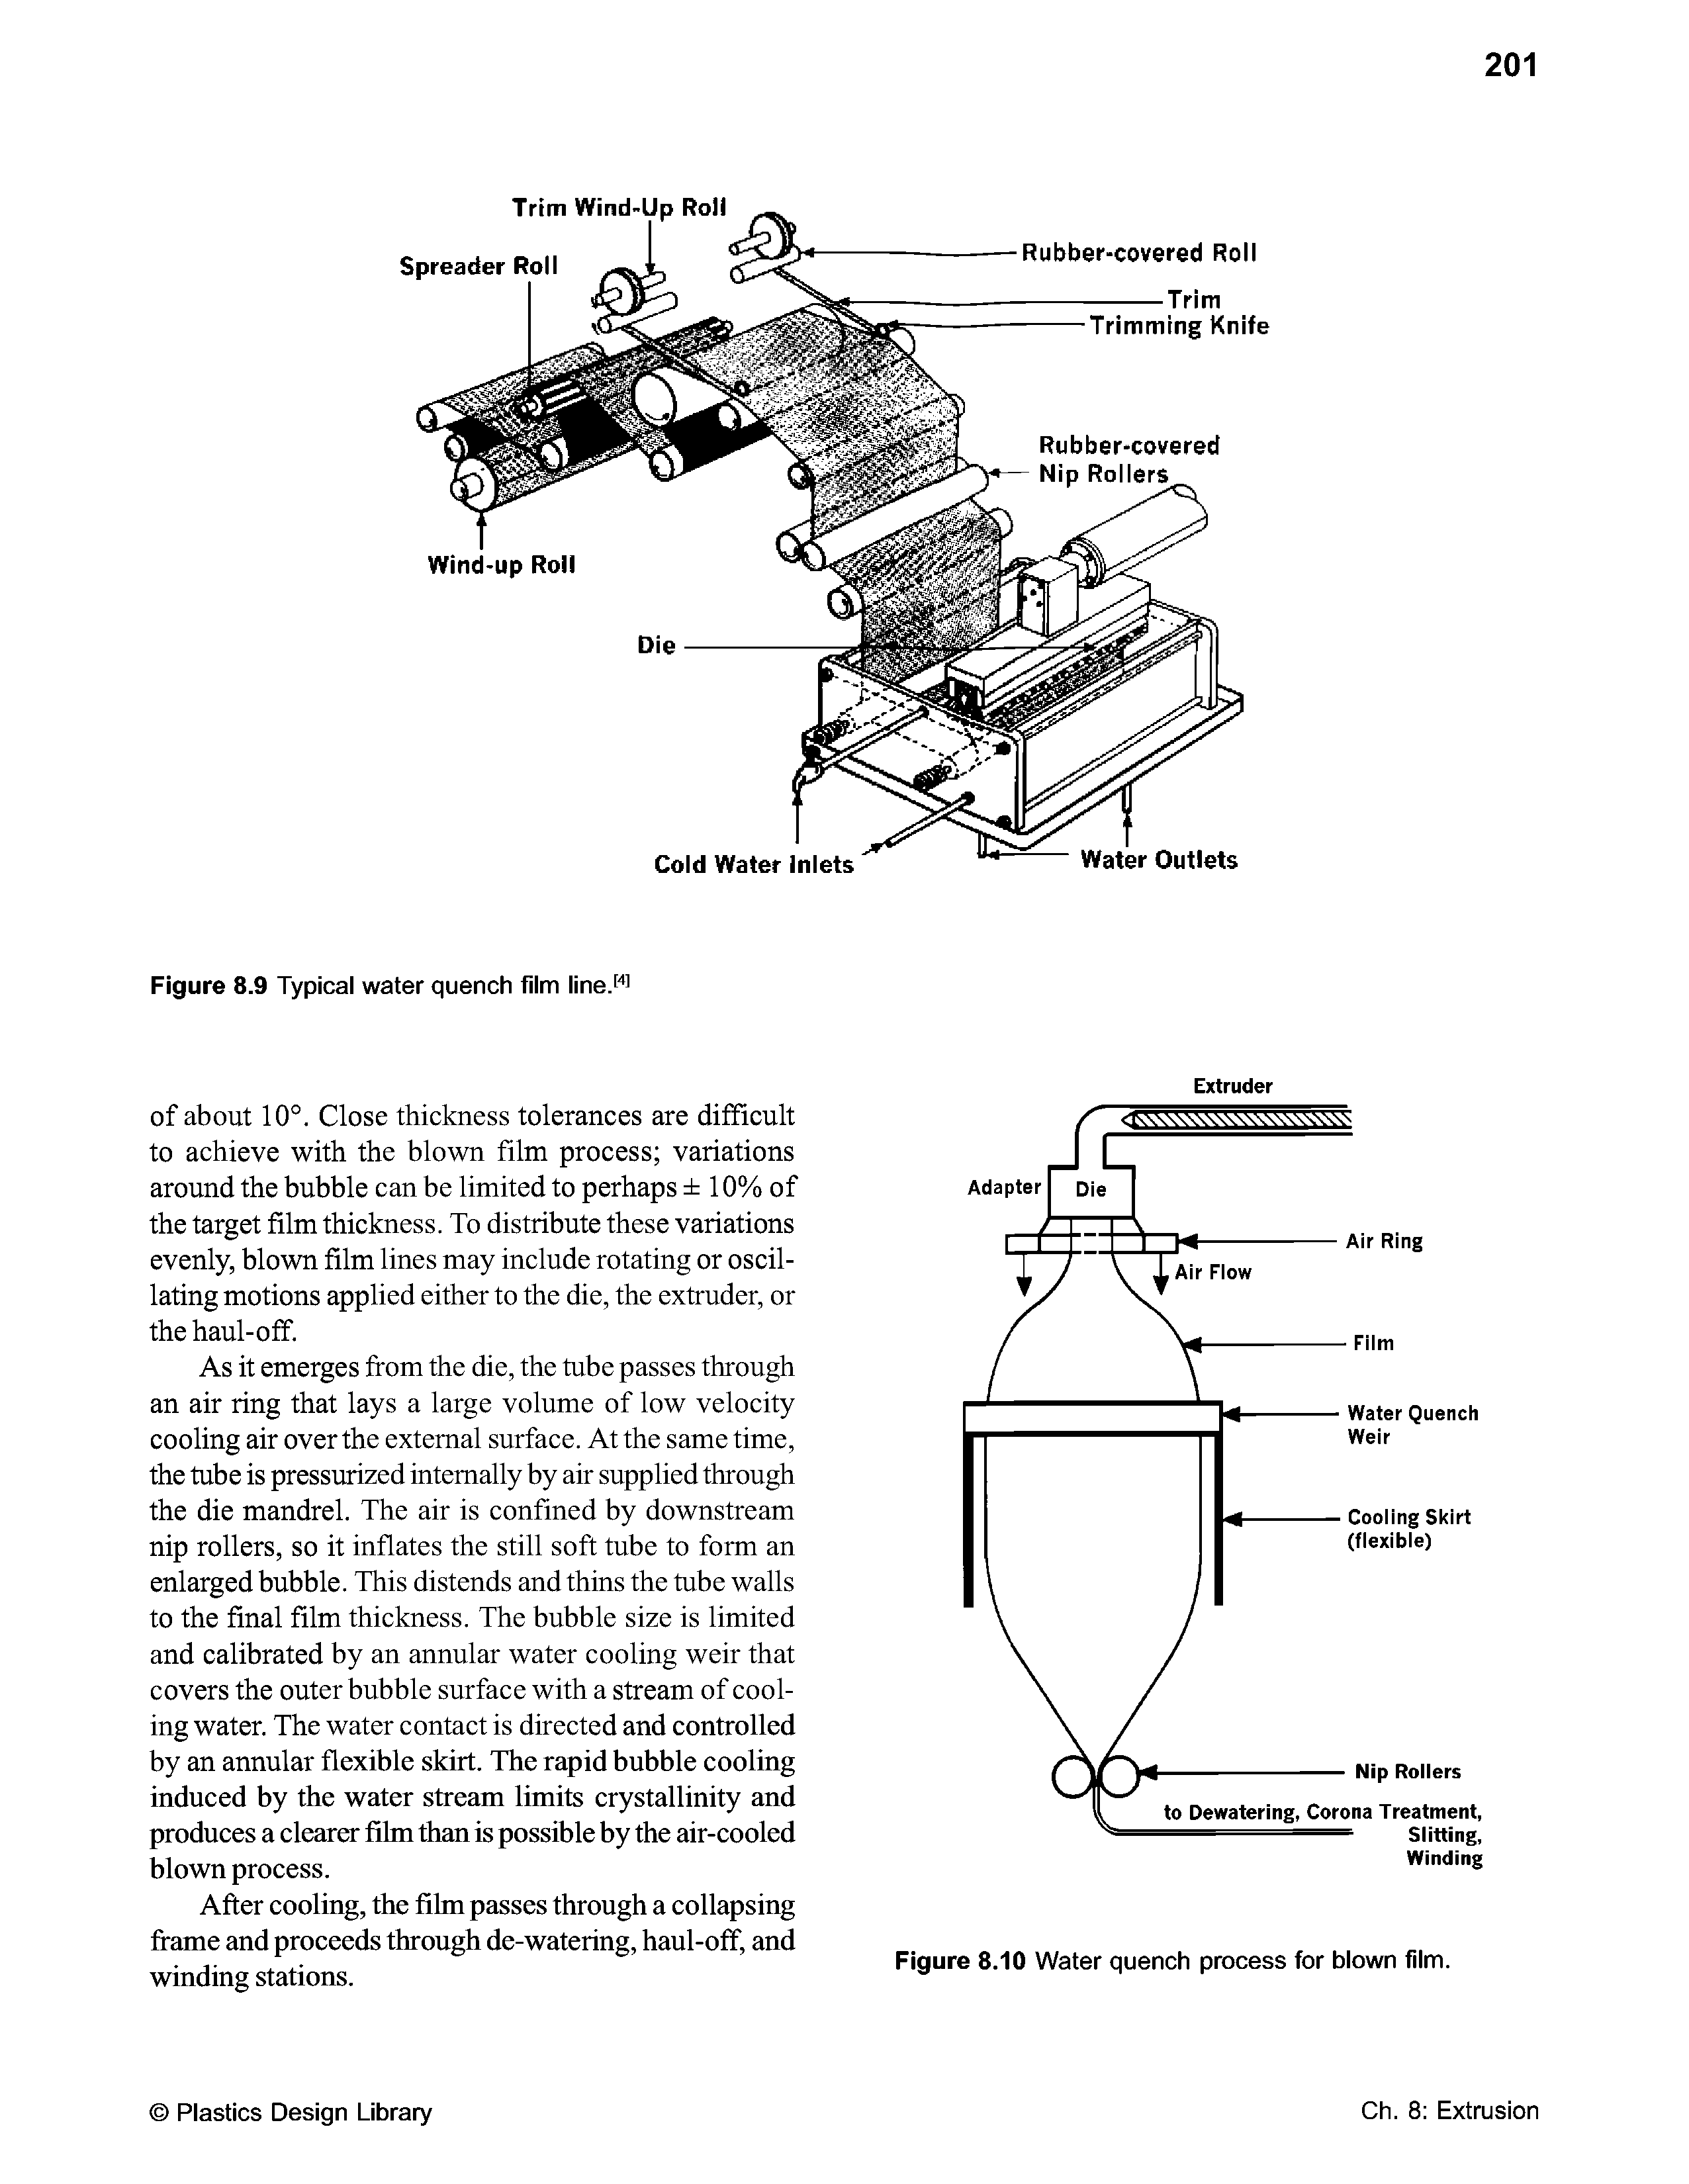 Figure 8.10 Water quench process for blown film.